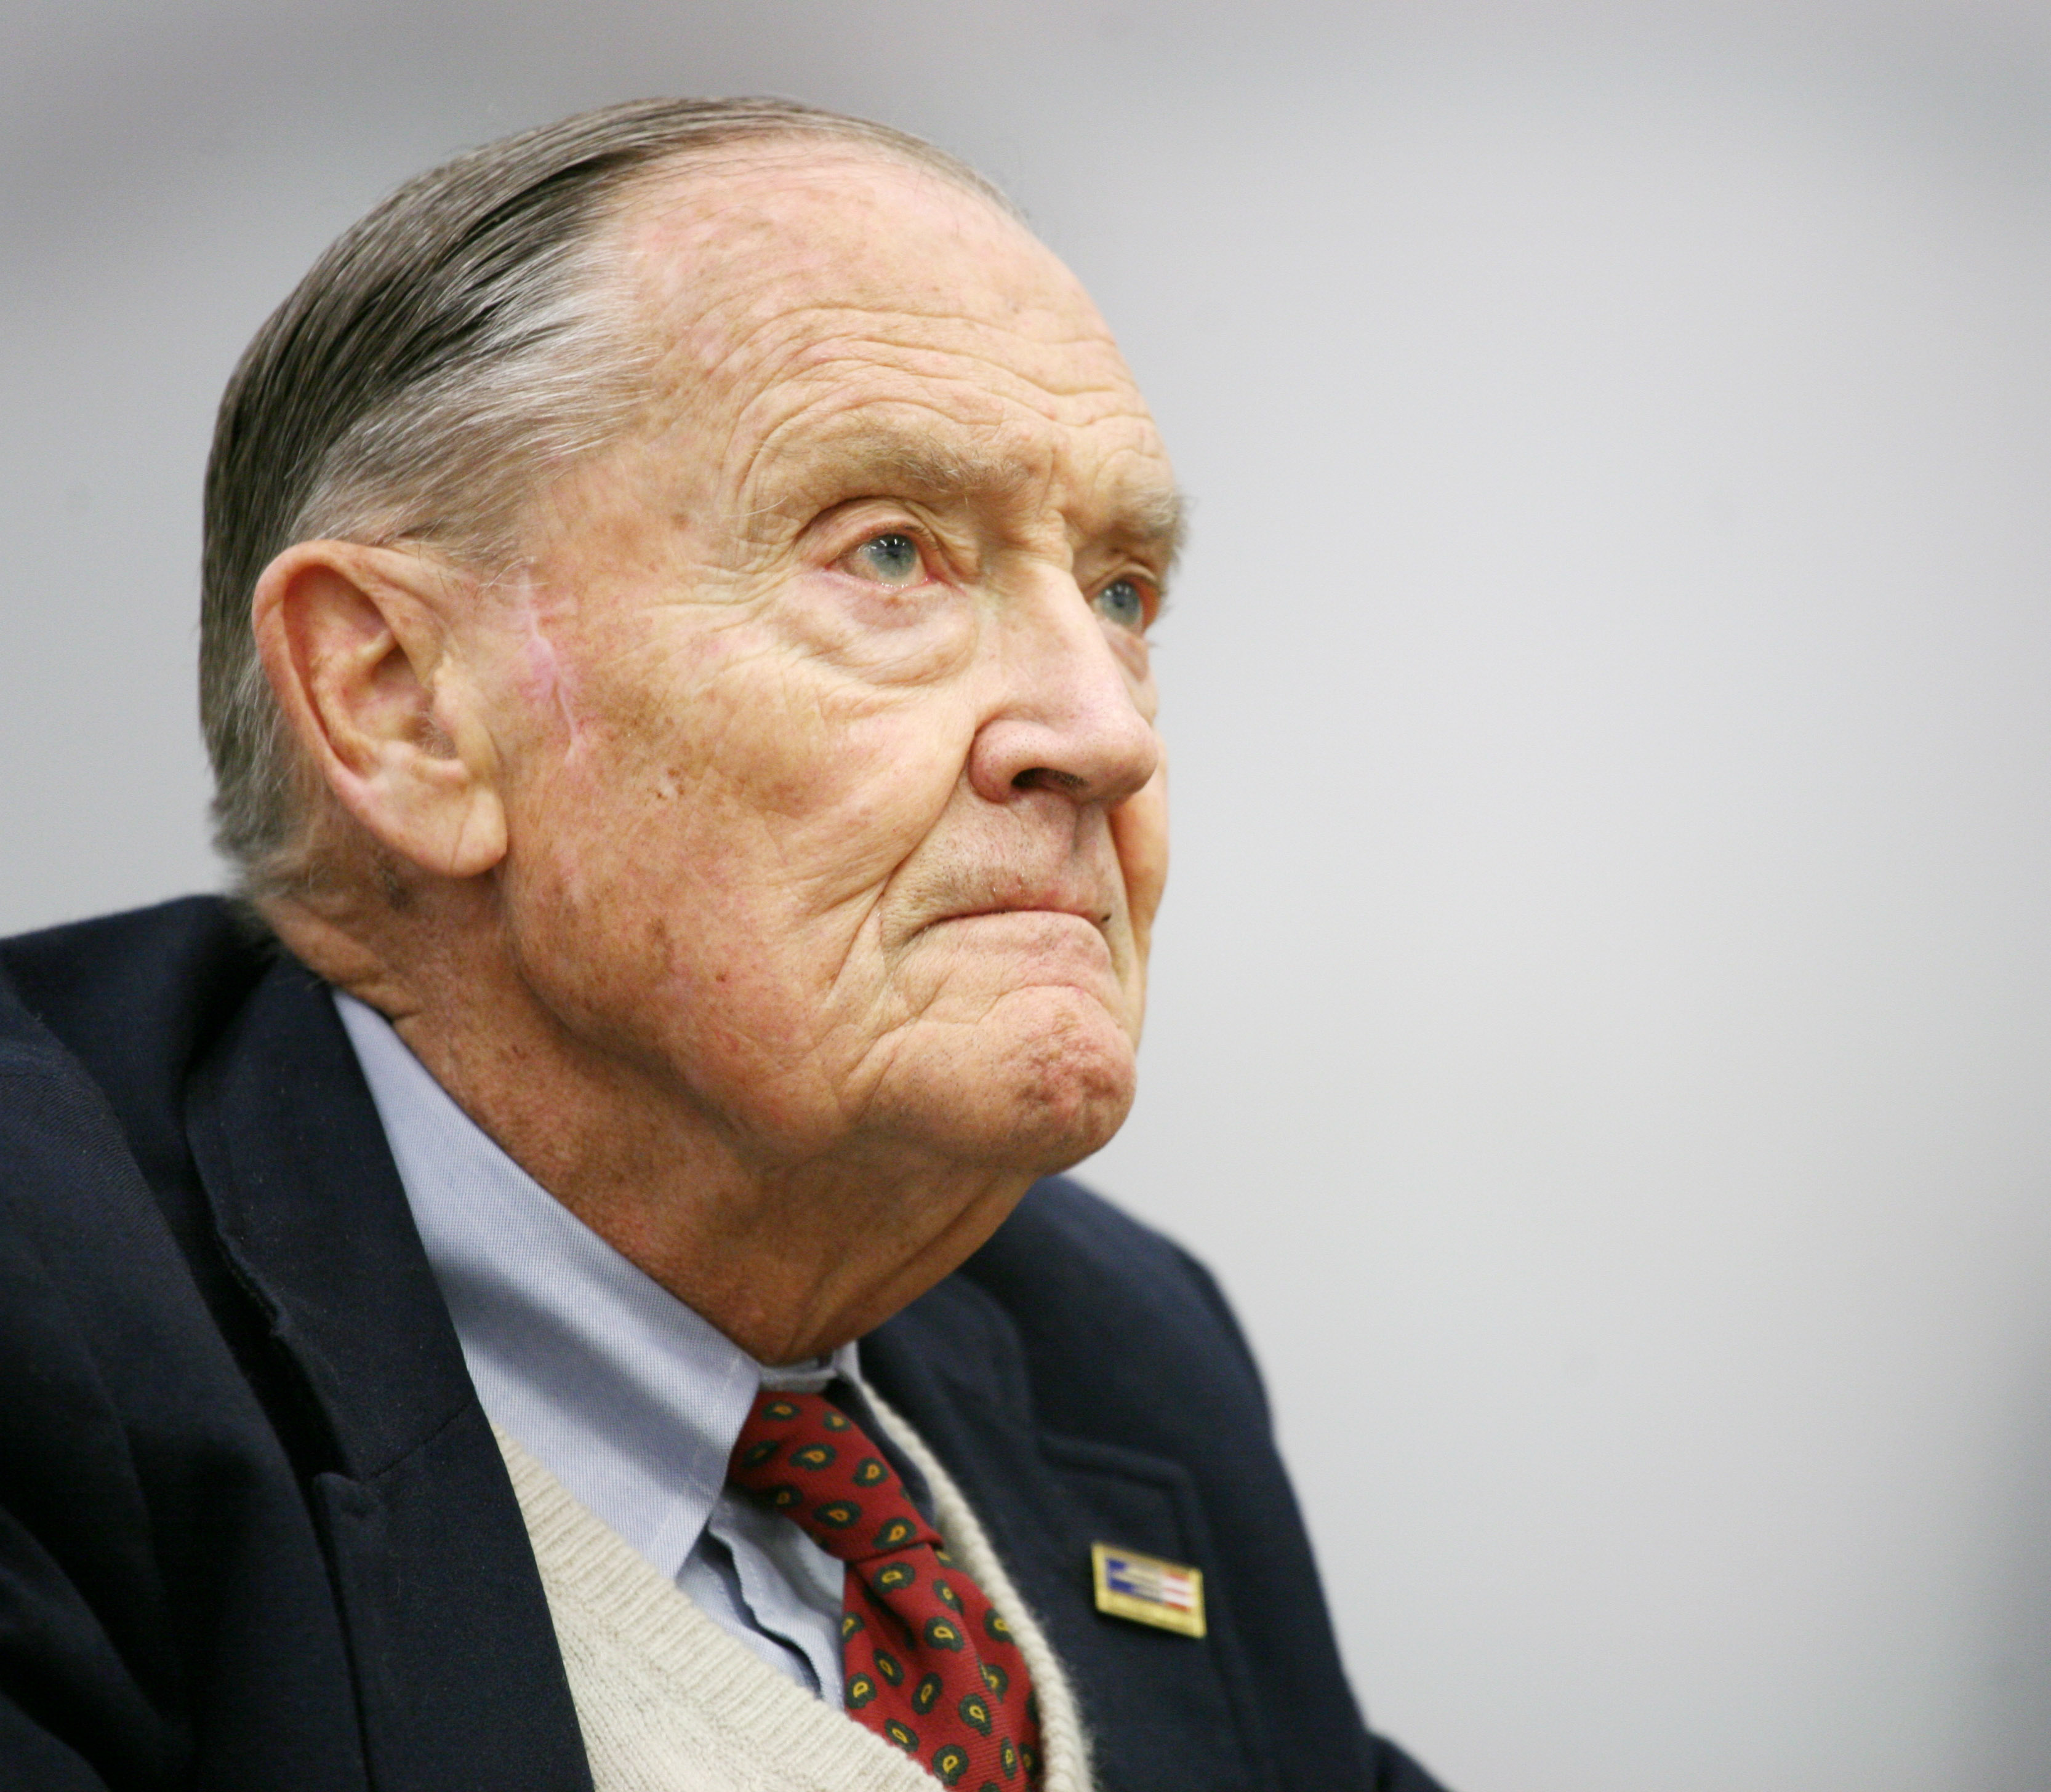 John Bogle, founder of The Vanguard Group, listens during an interview at The Associated Press on in New York on May 20, 2008. Bogle died on Jan. 16, 2019 at the age of 89. (Mark Lennihan—AP/REX/Shutterstock)